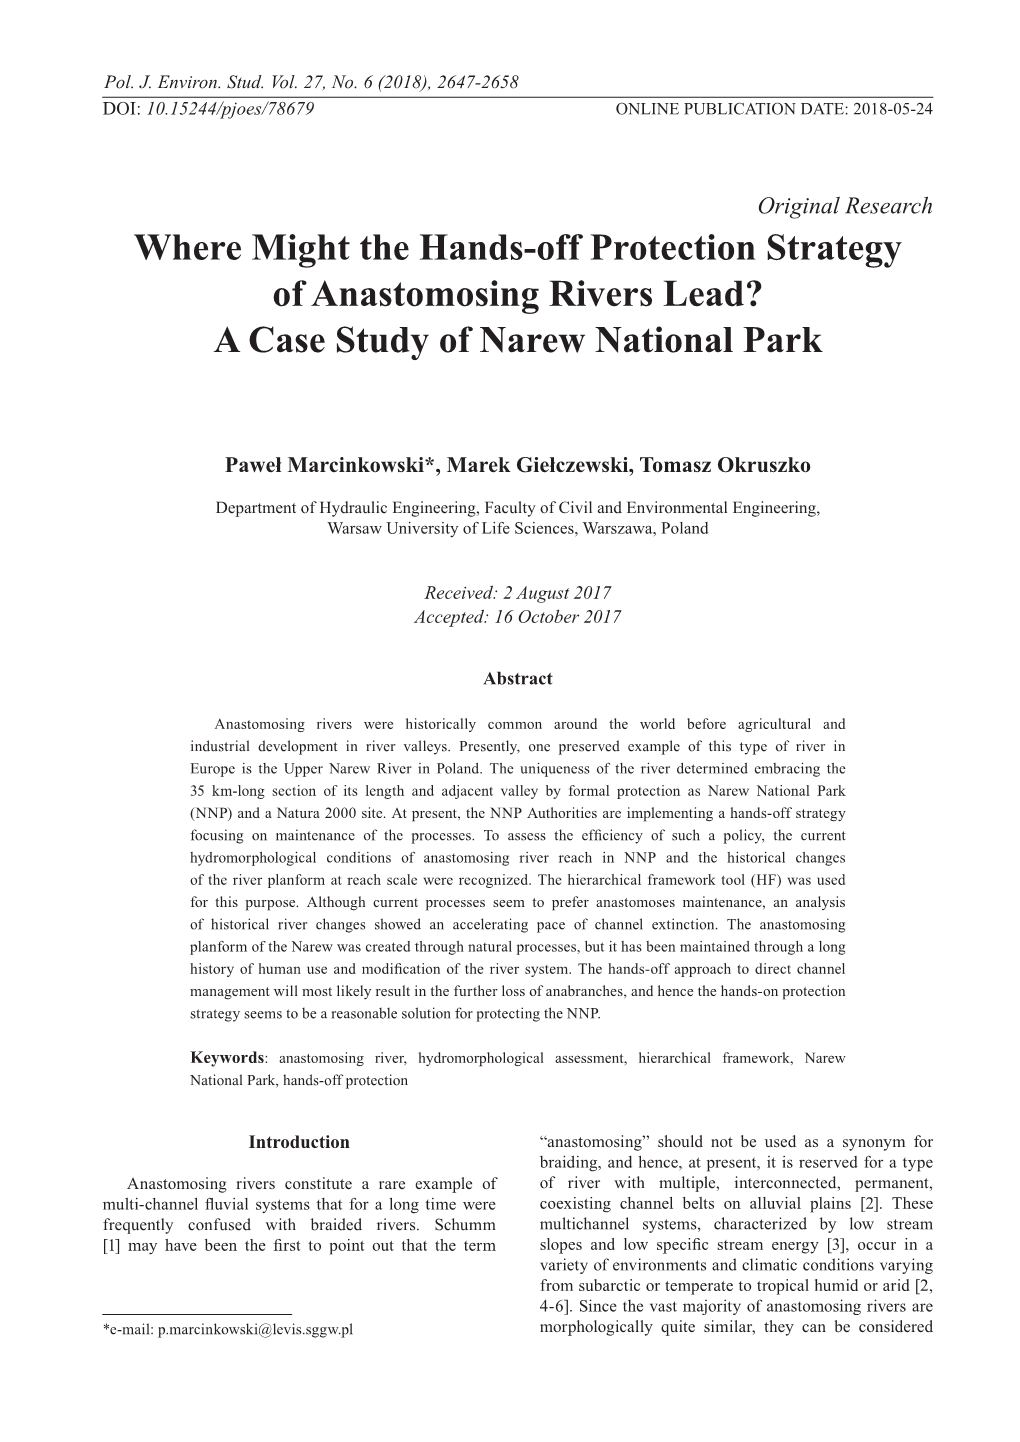 Where Might the Hands-Off Protection Strategy of Anastomosing Rivers Lead? a Case Study of Narew National Park